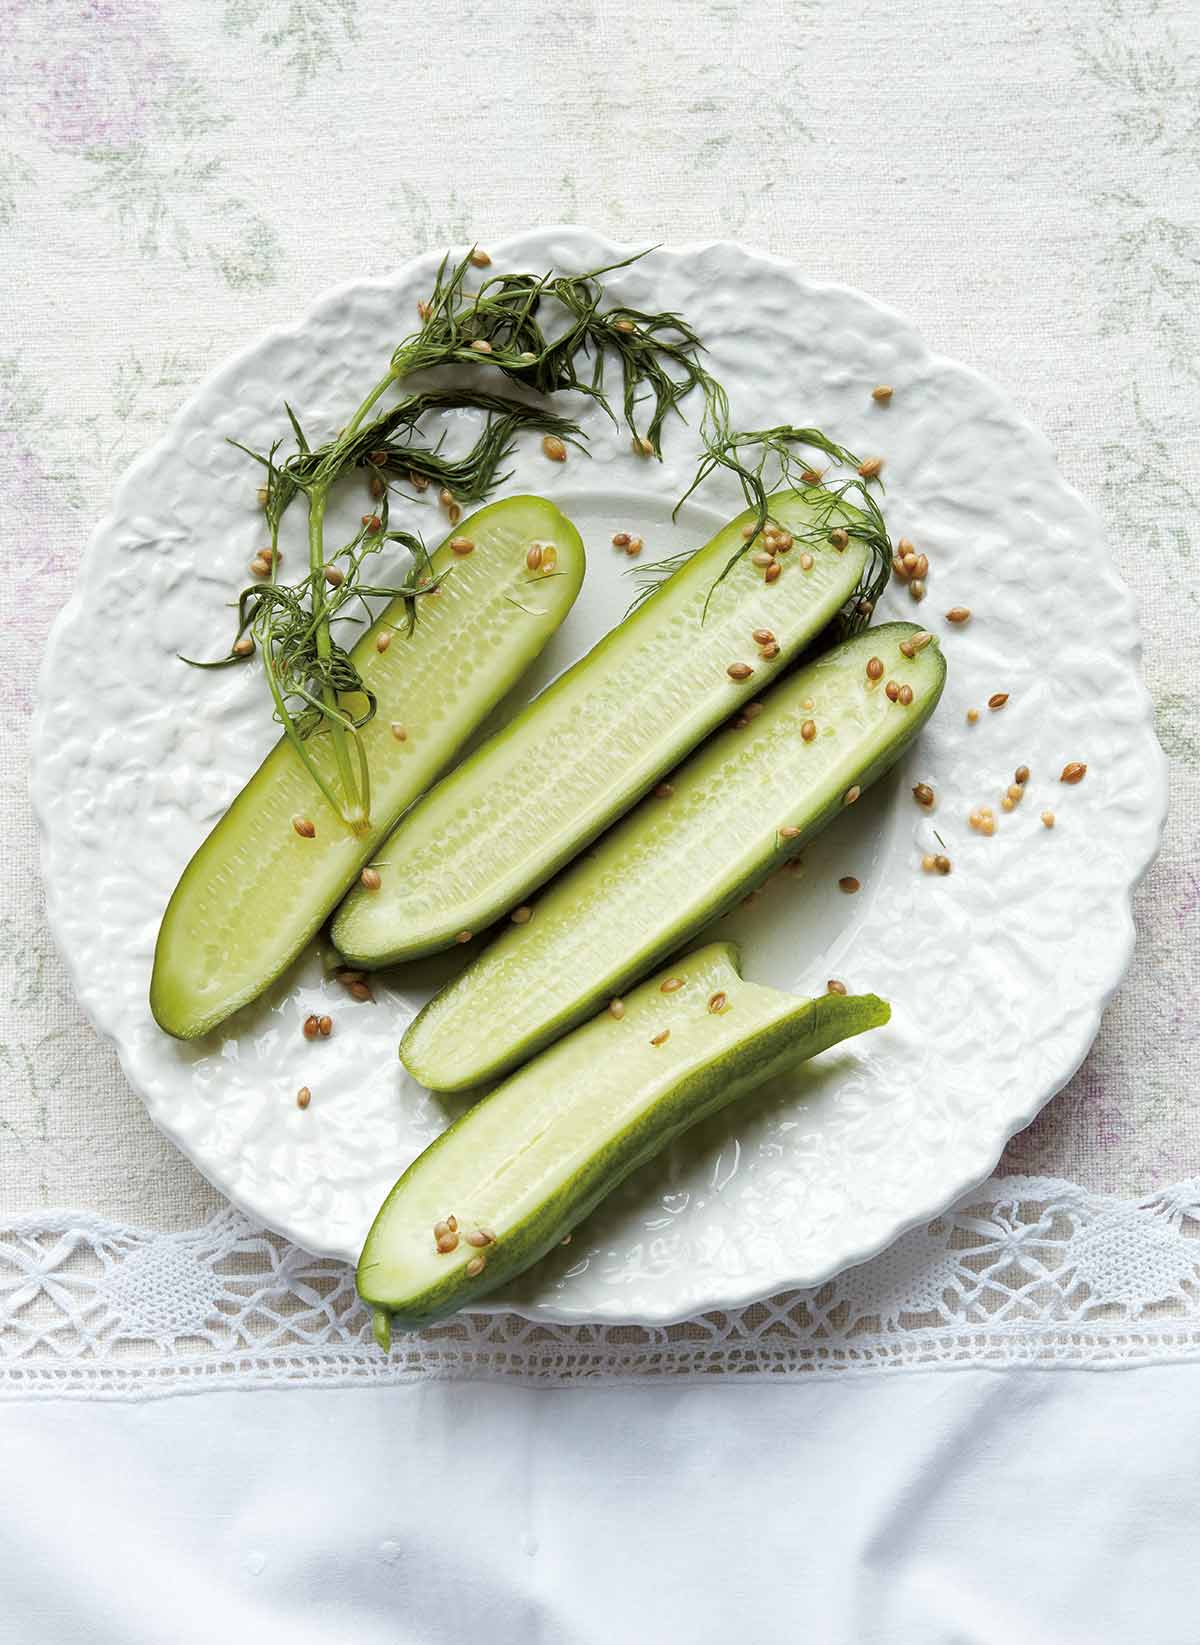 Four halved quick dill pickles with a sprig of dill and some seeds on a white plate.